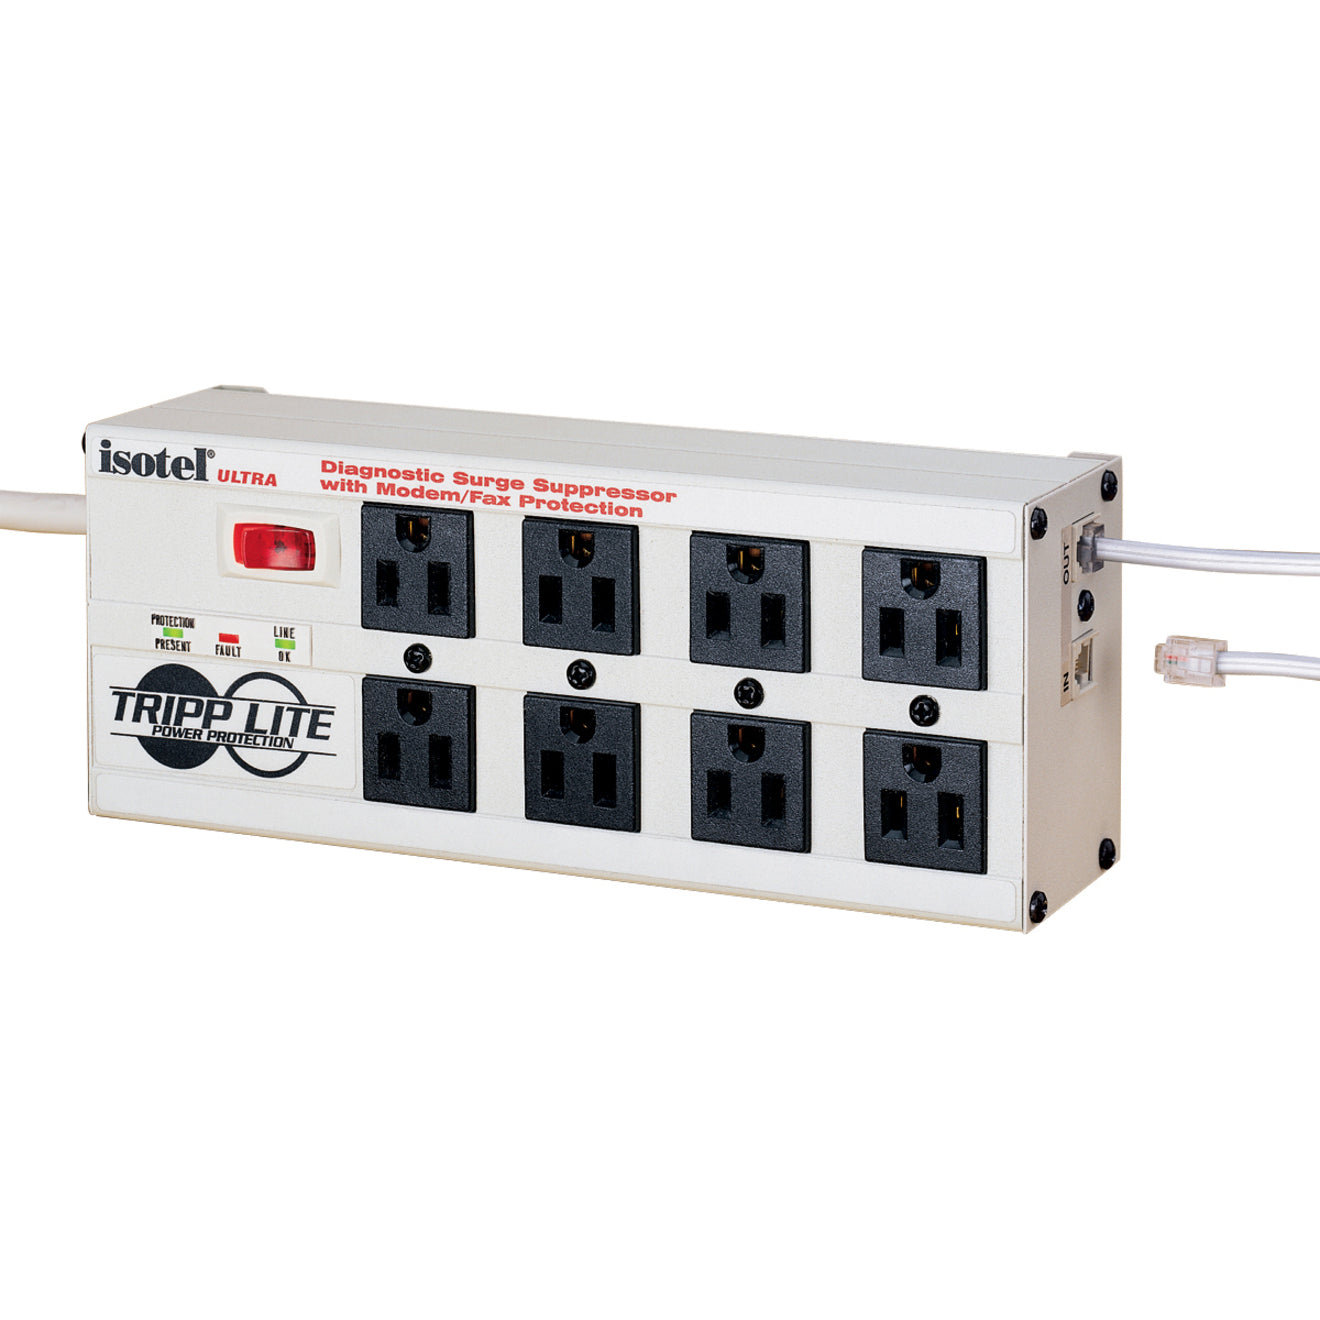 Tripp Lite ISOTEL8ULTRA Isobar Surge Protector Metal RJ11 8 Outlet 12' Cord 3840 Joules, Lifetime Warranty, 120V AC Power Handling